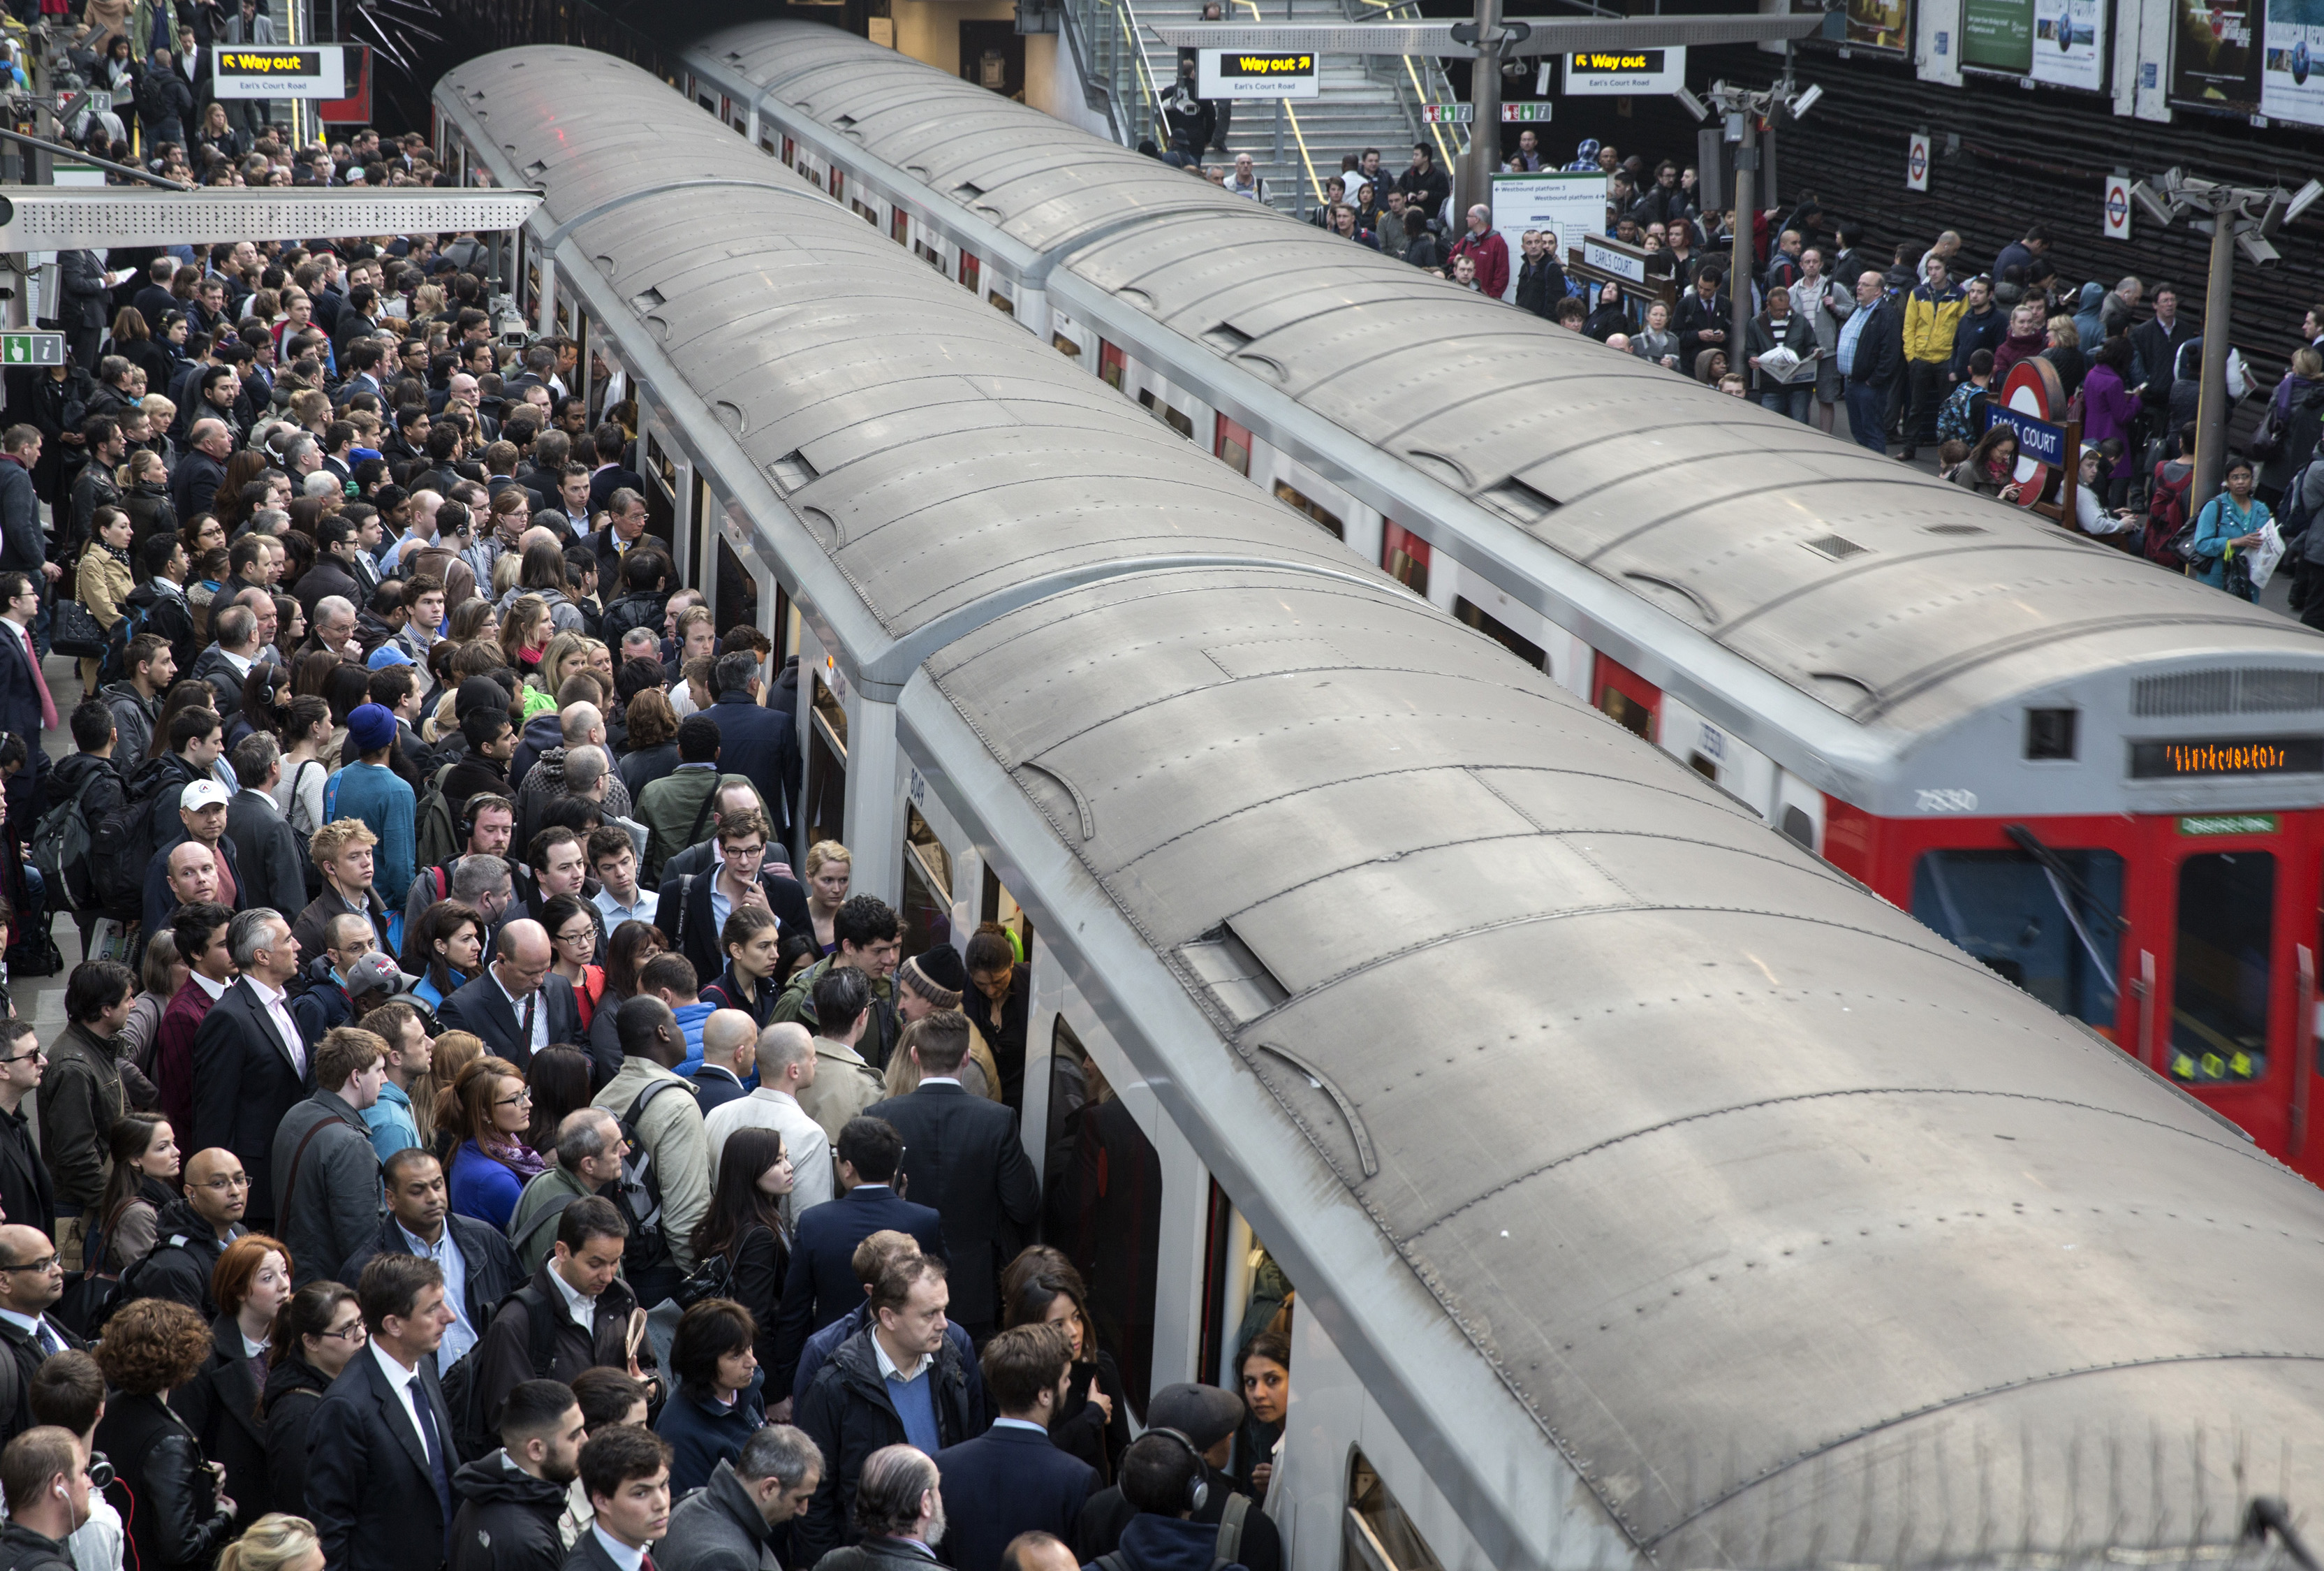 Commuters face disruption during Tube strike